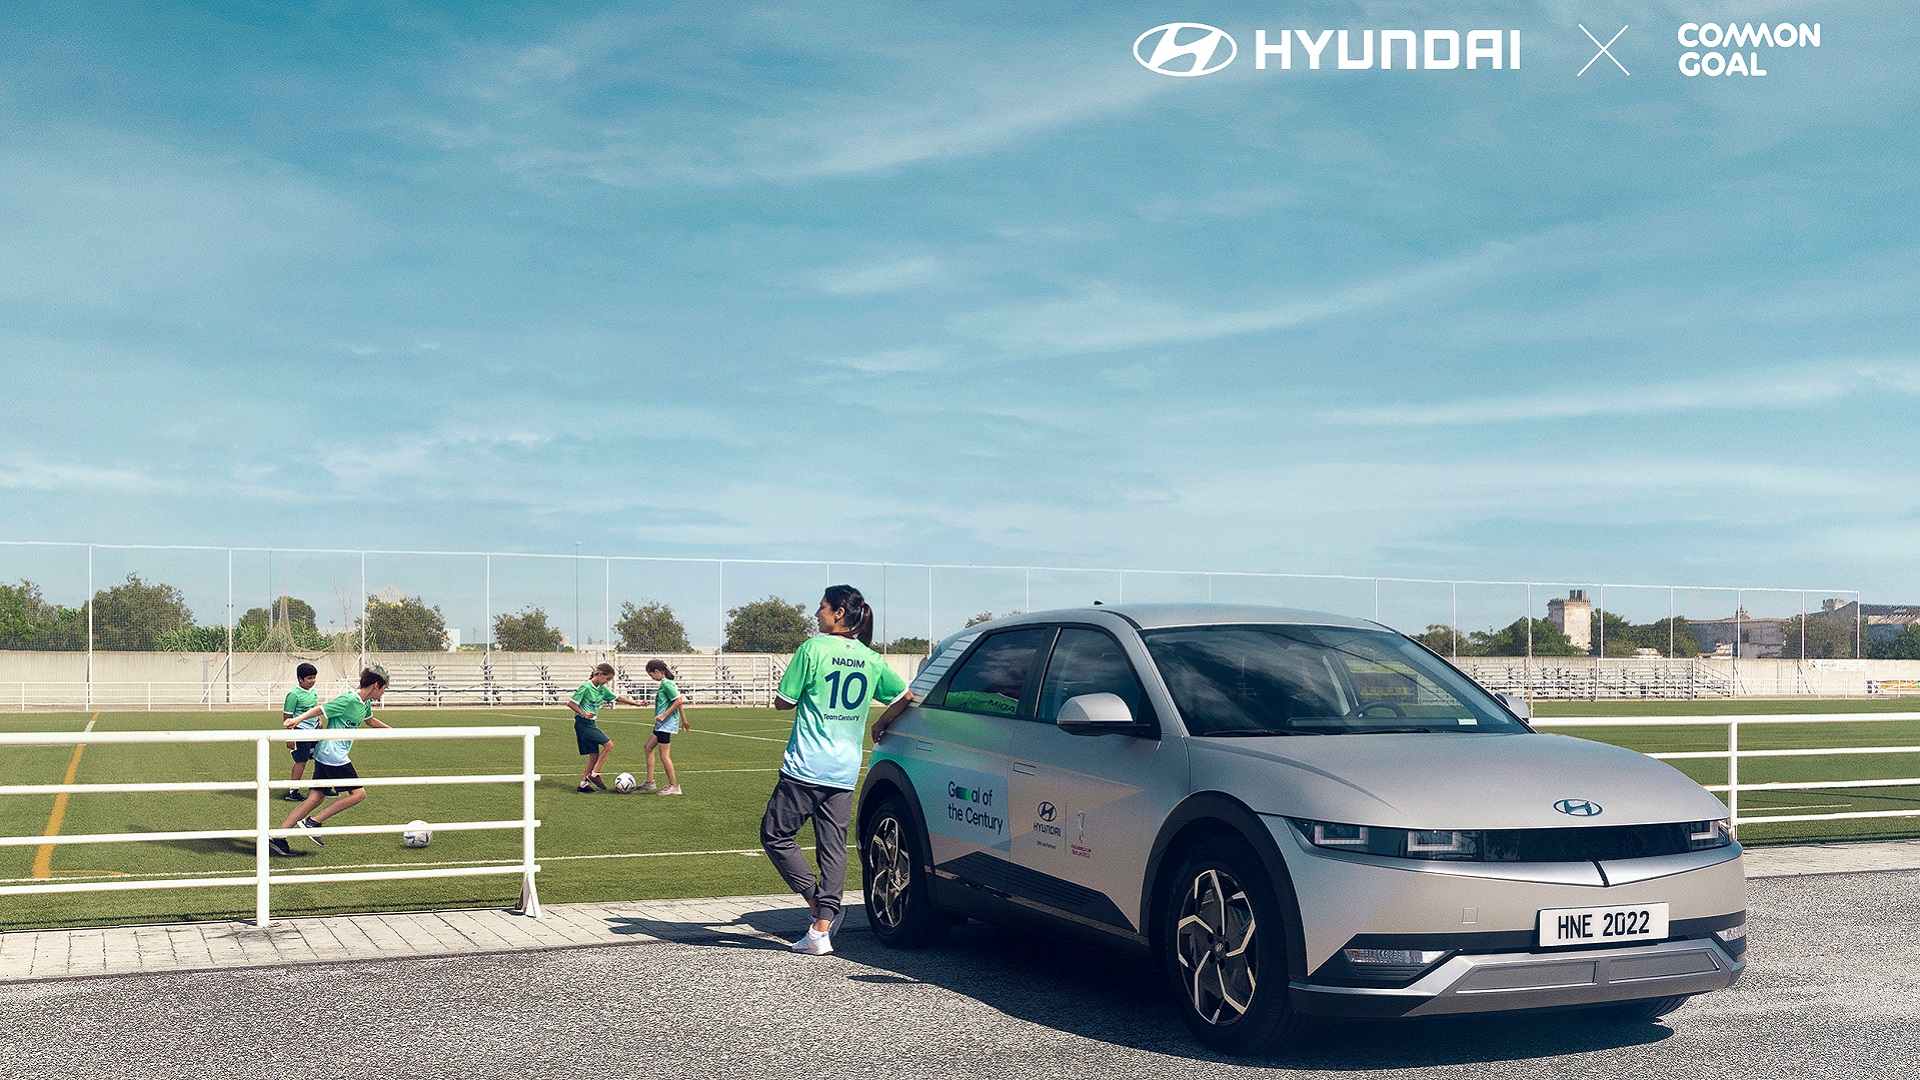 Hyundai Motor Company has launched two social media challenges with its  global brand ambassador, BTS, to raise awareness of the importance…